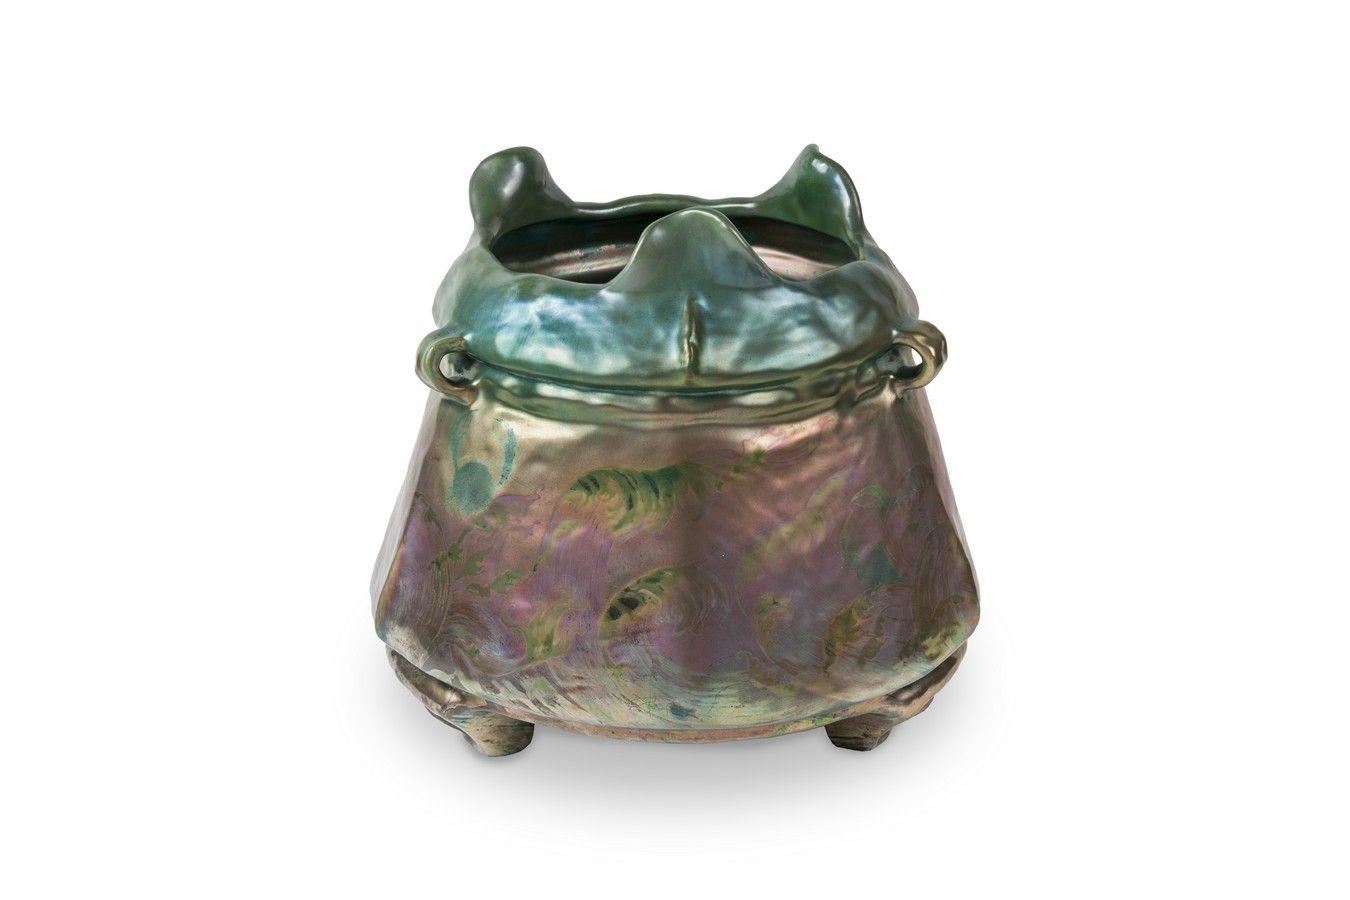 Iridescent planter, in the shape of a cauldron by Clément Massier, for the Hôtel Ritz, (signed)
Golfe Juan
1885 
Iridescent glazed earthenware

This planter designed by Clément Massier, annotated 